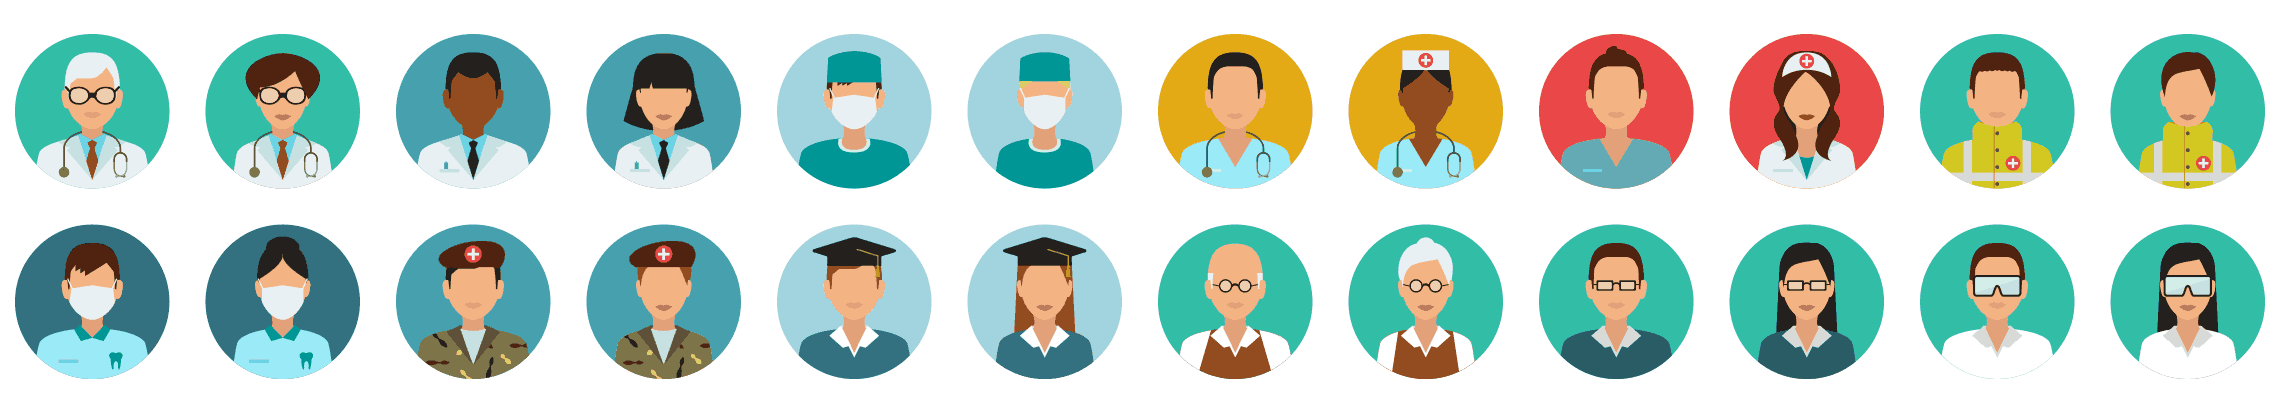 avatars-medical-and-education-flat-icons-vol-1-preview